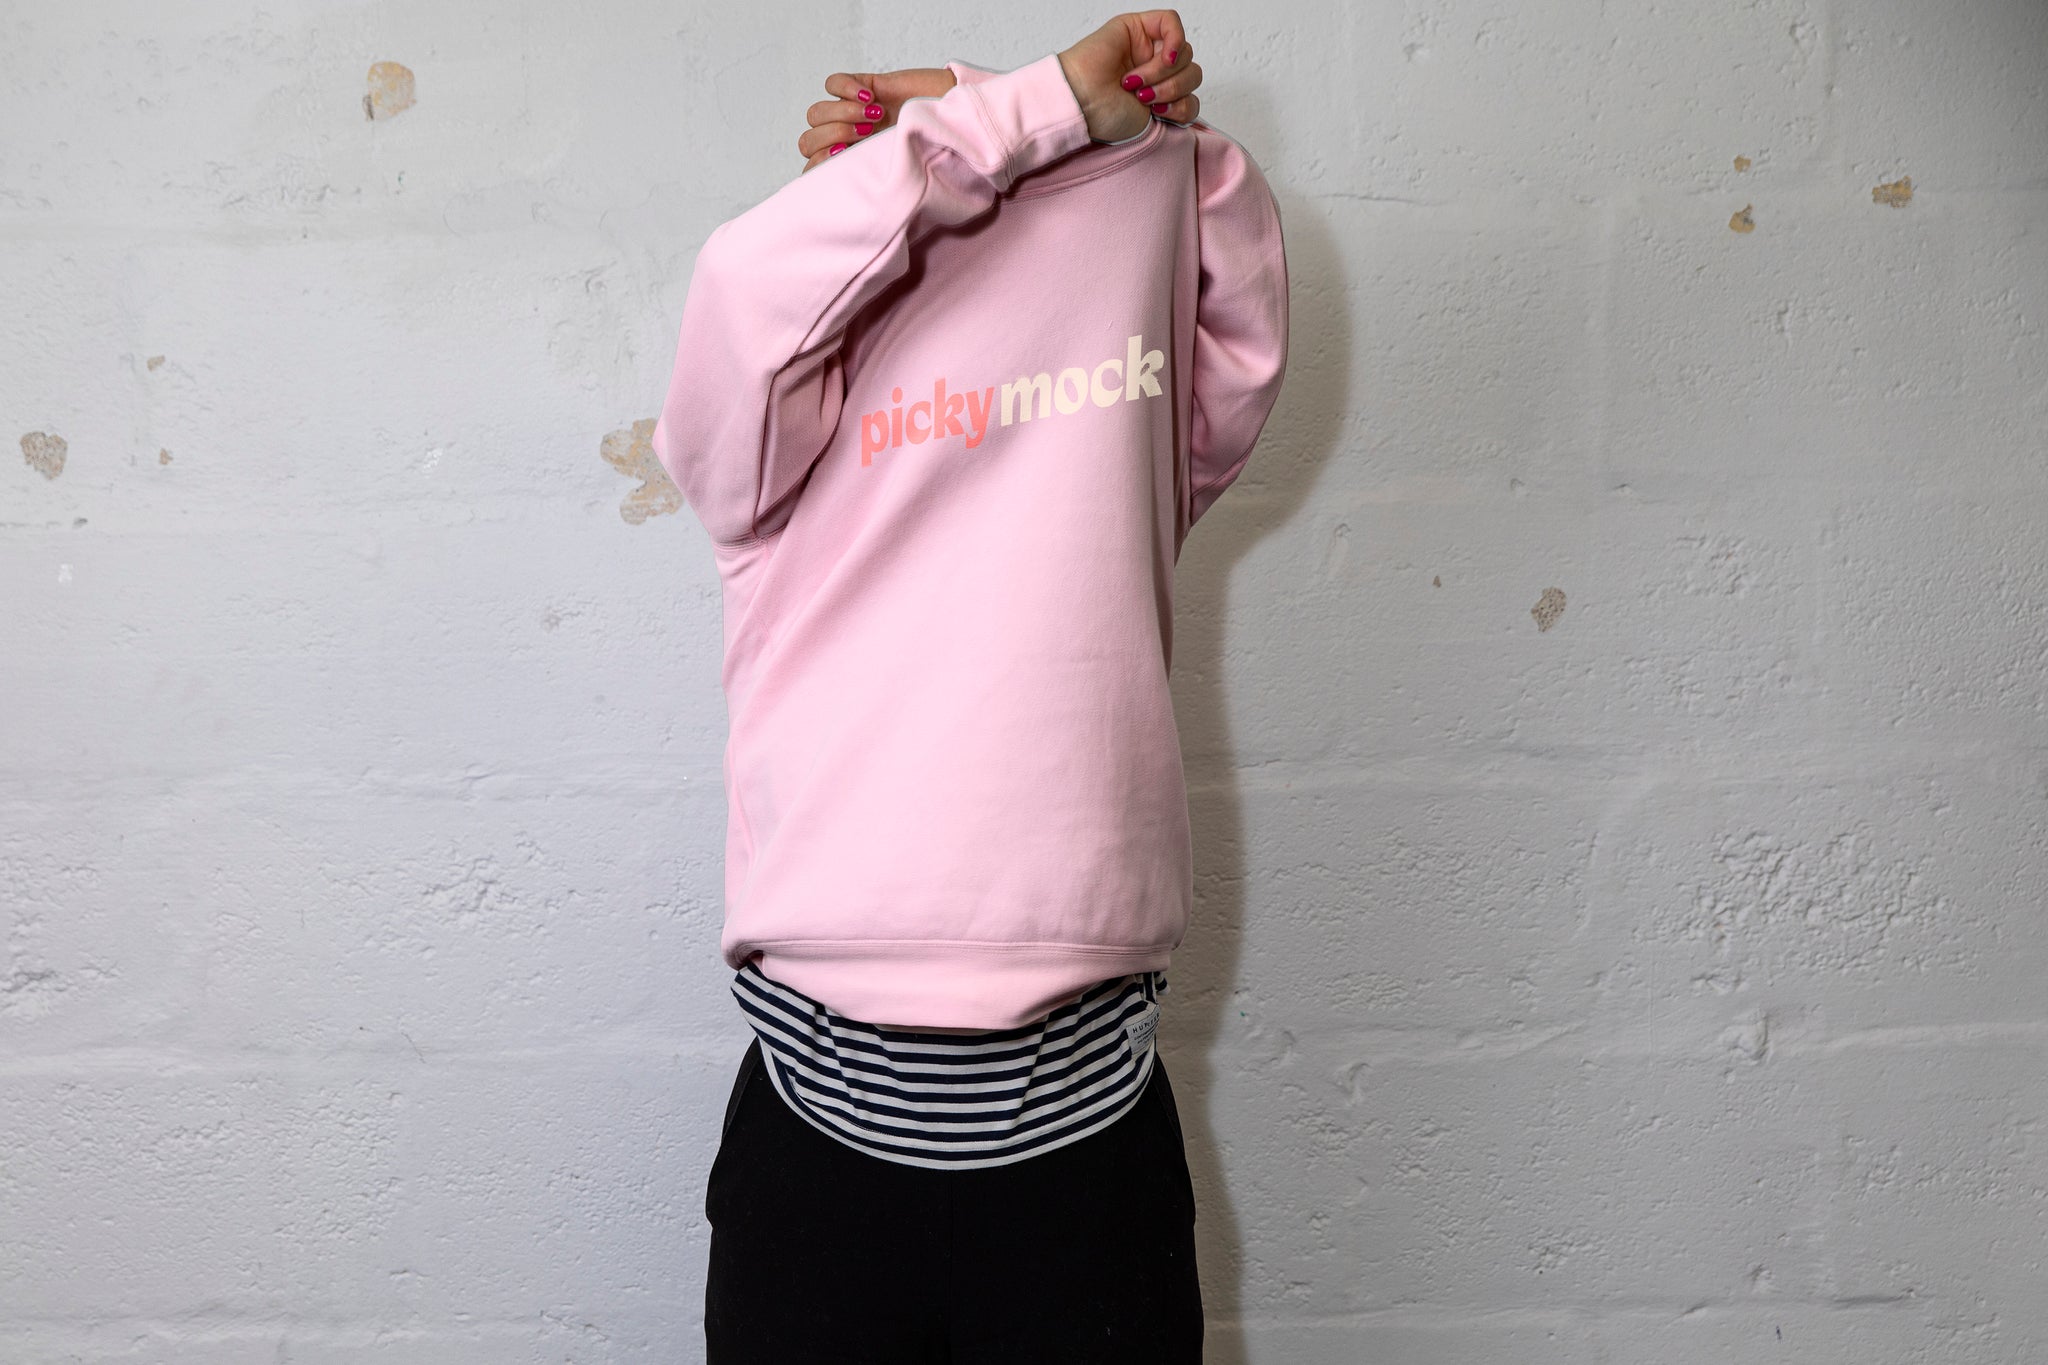 Person pulling a large pink jumper over their head with both hands above their head. Picky Stock written across the chest. White cinderbock background. 